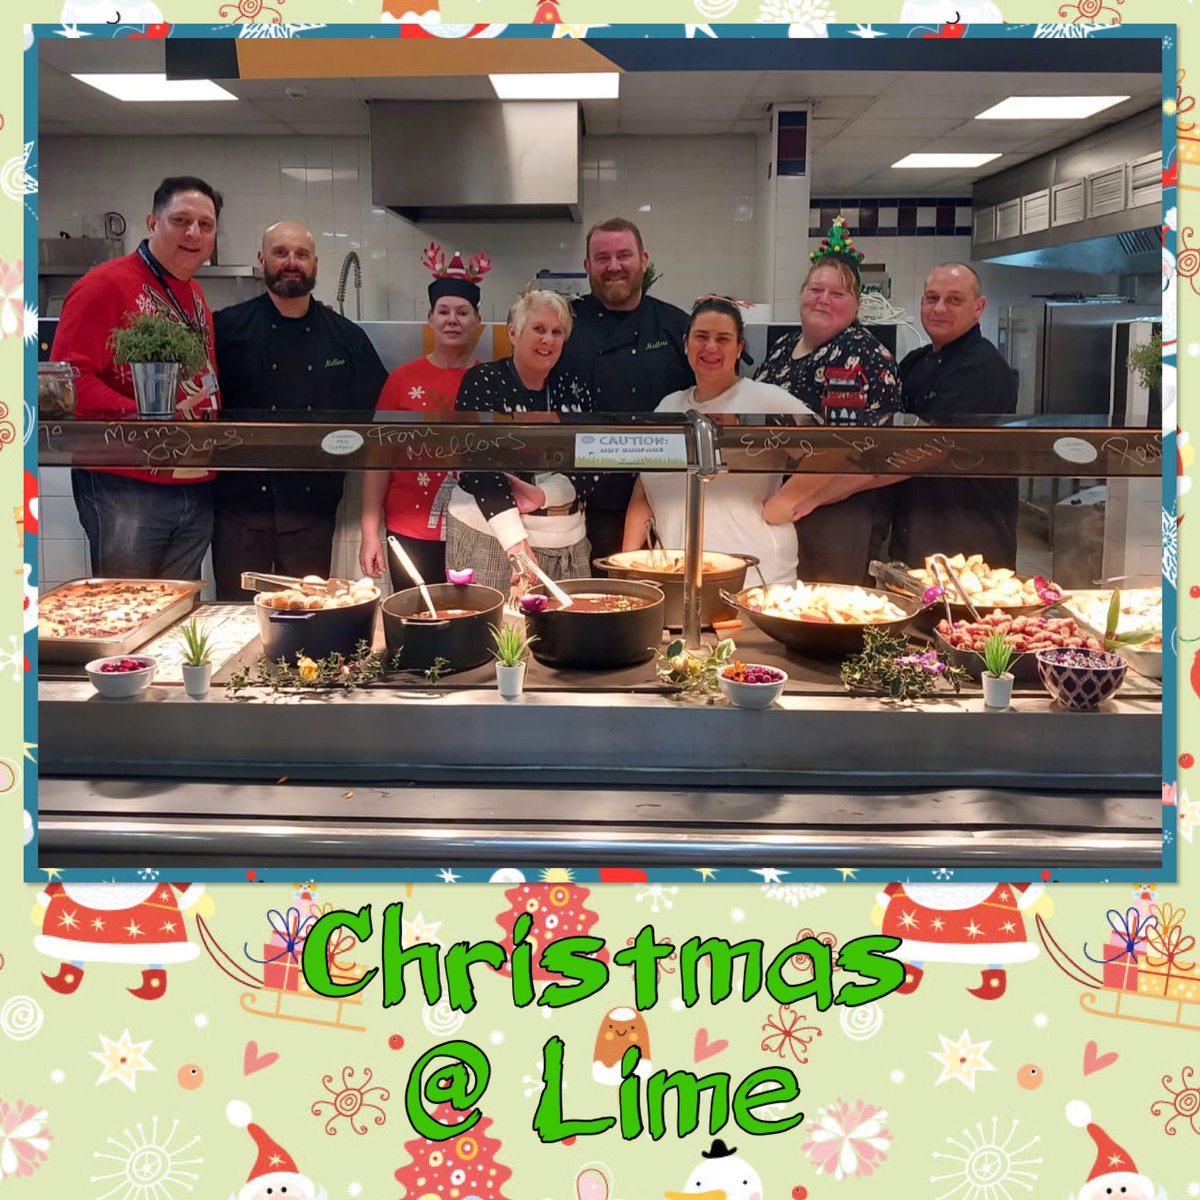 It’s Ho!Ho!Ho! Lights, camera & full of action at Lime this Christmas!! 👍🥳🥳🥳@mellorscatering @mrtonybaloni @Andrew_W4 @nugent_nicola @marklyons151162 @JohnCP_Connolly